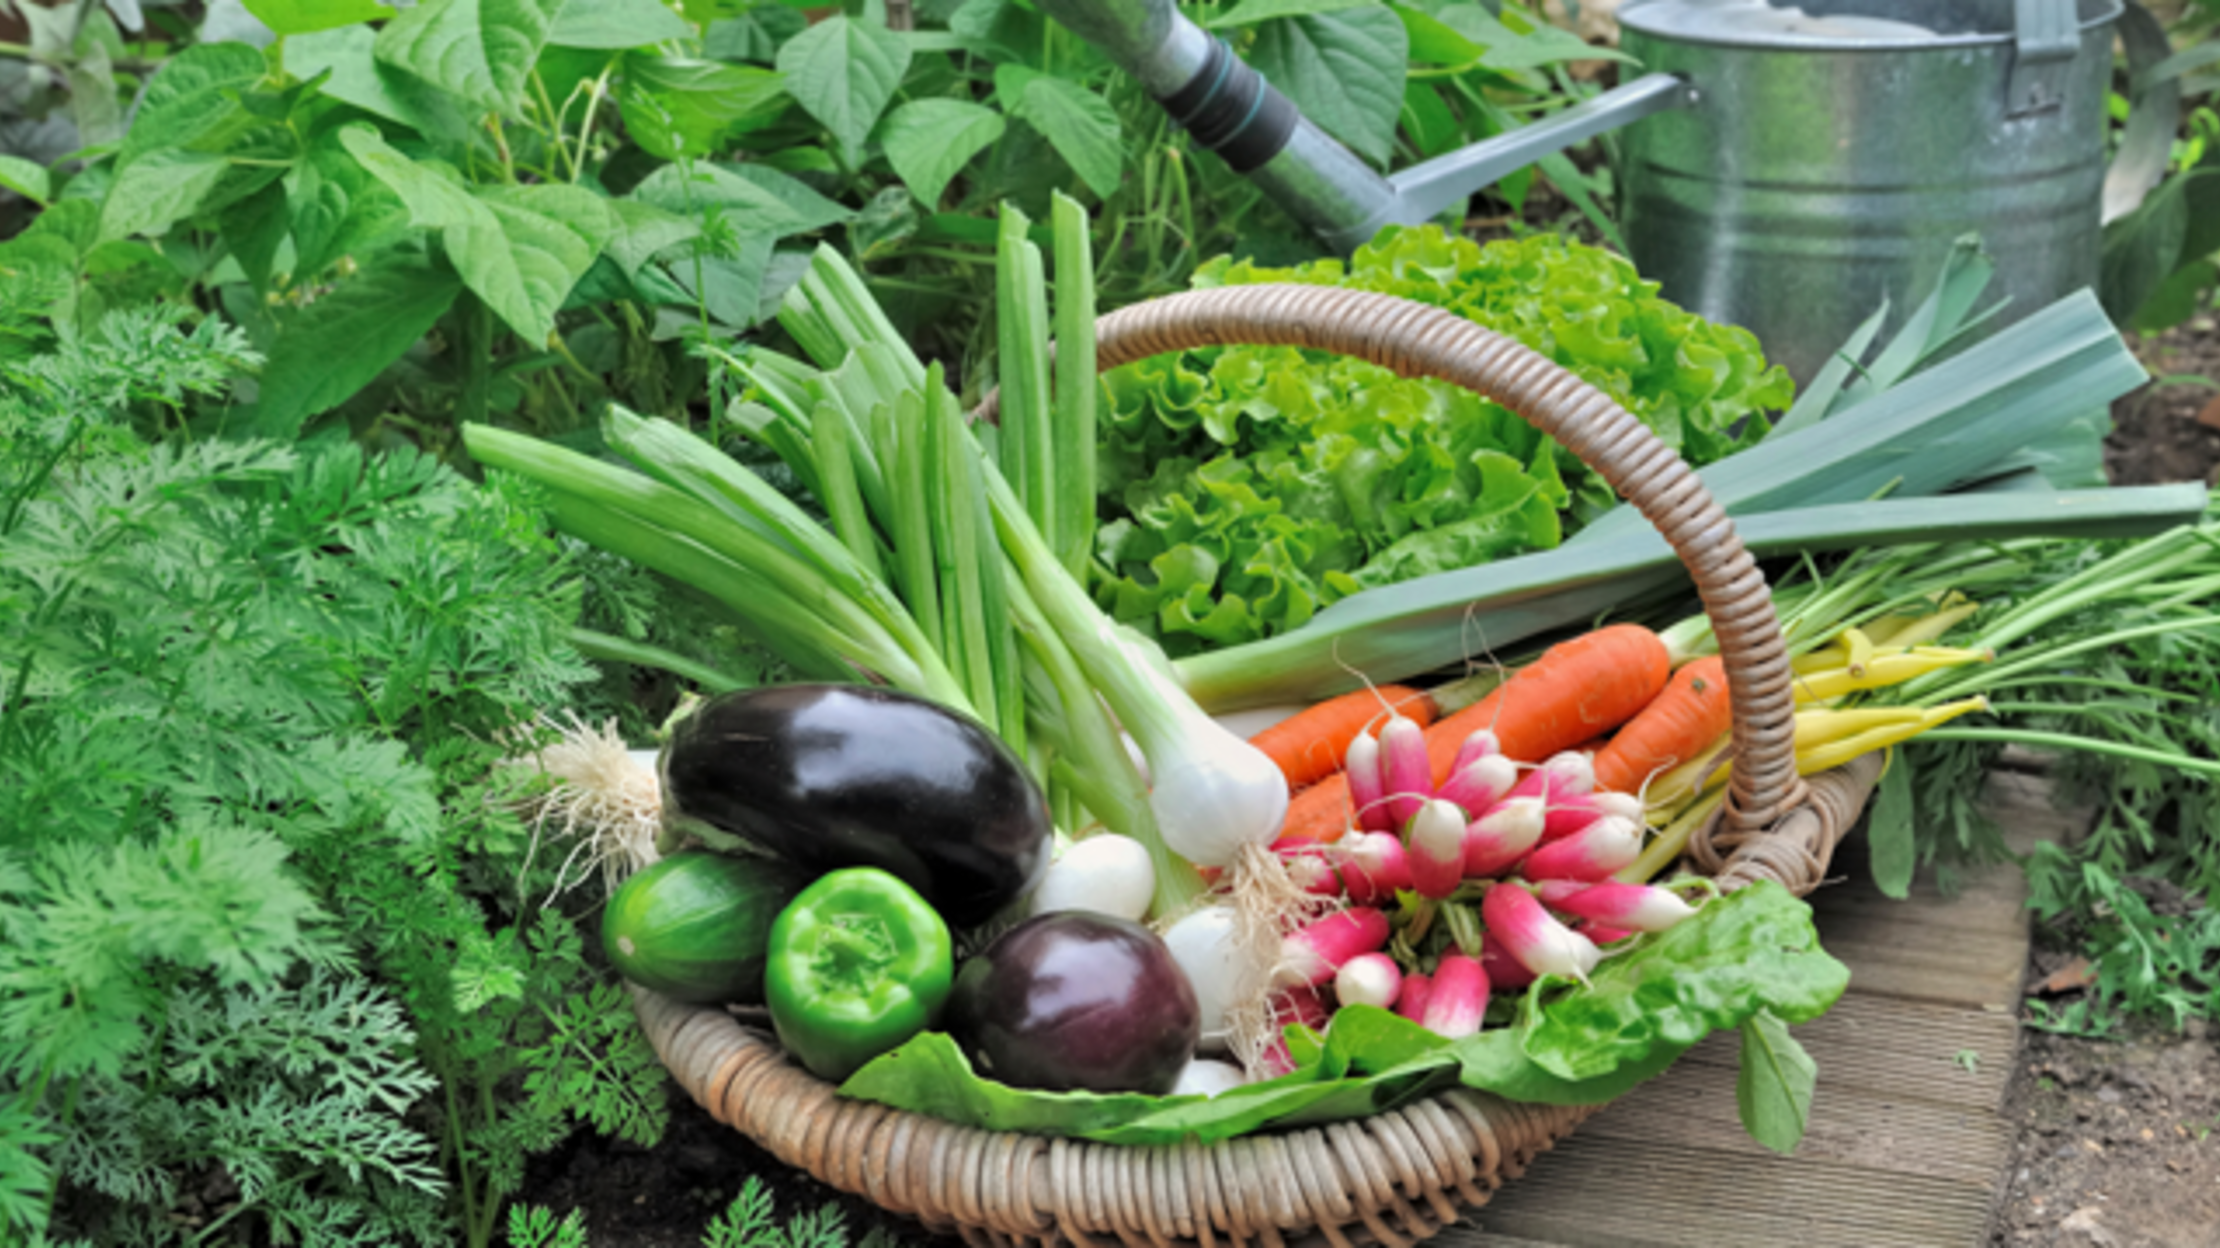 10 Vegetable Gardening Mistakes You Might Be Making | Mental Floss